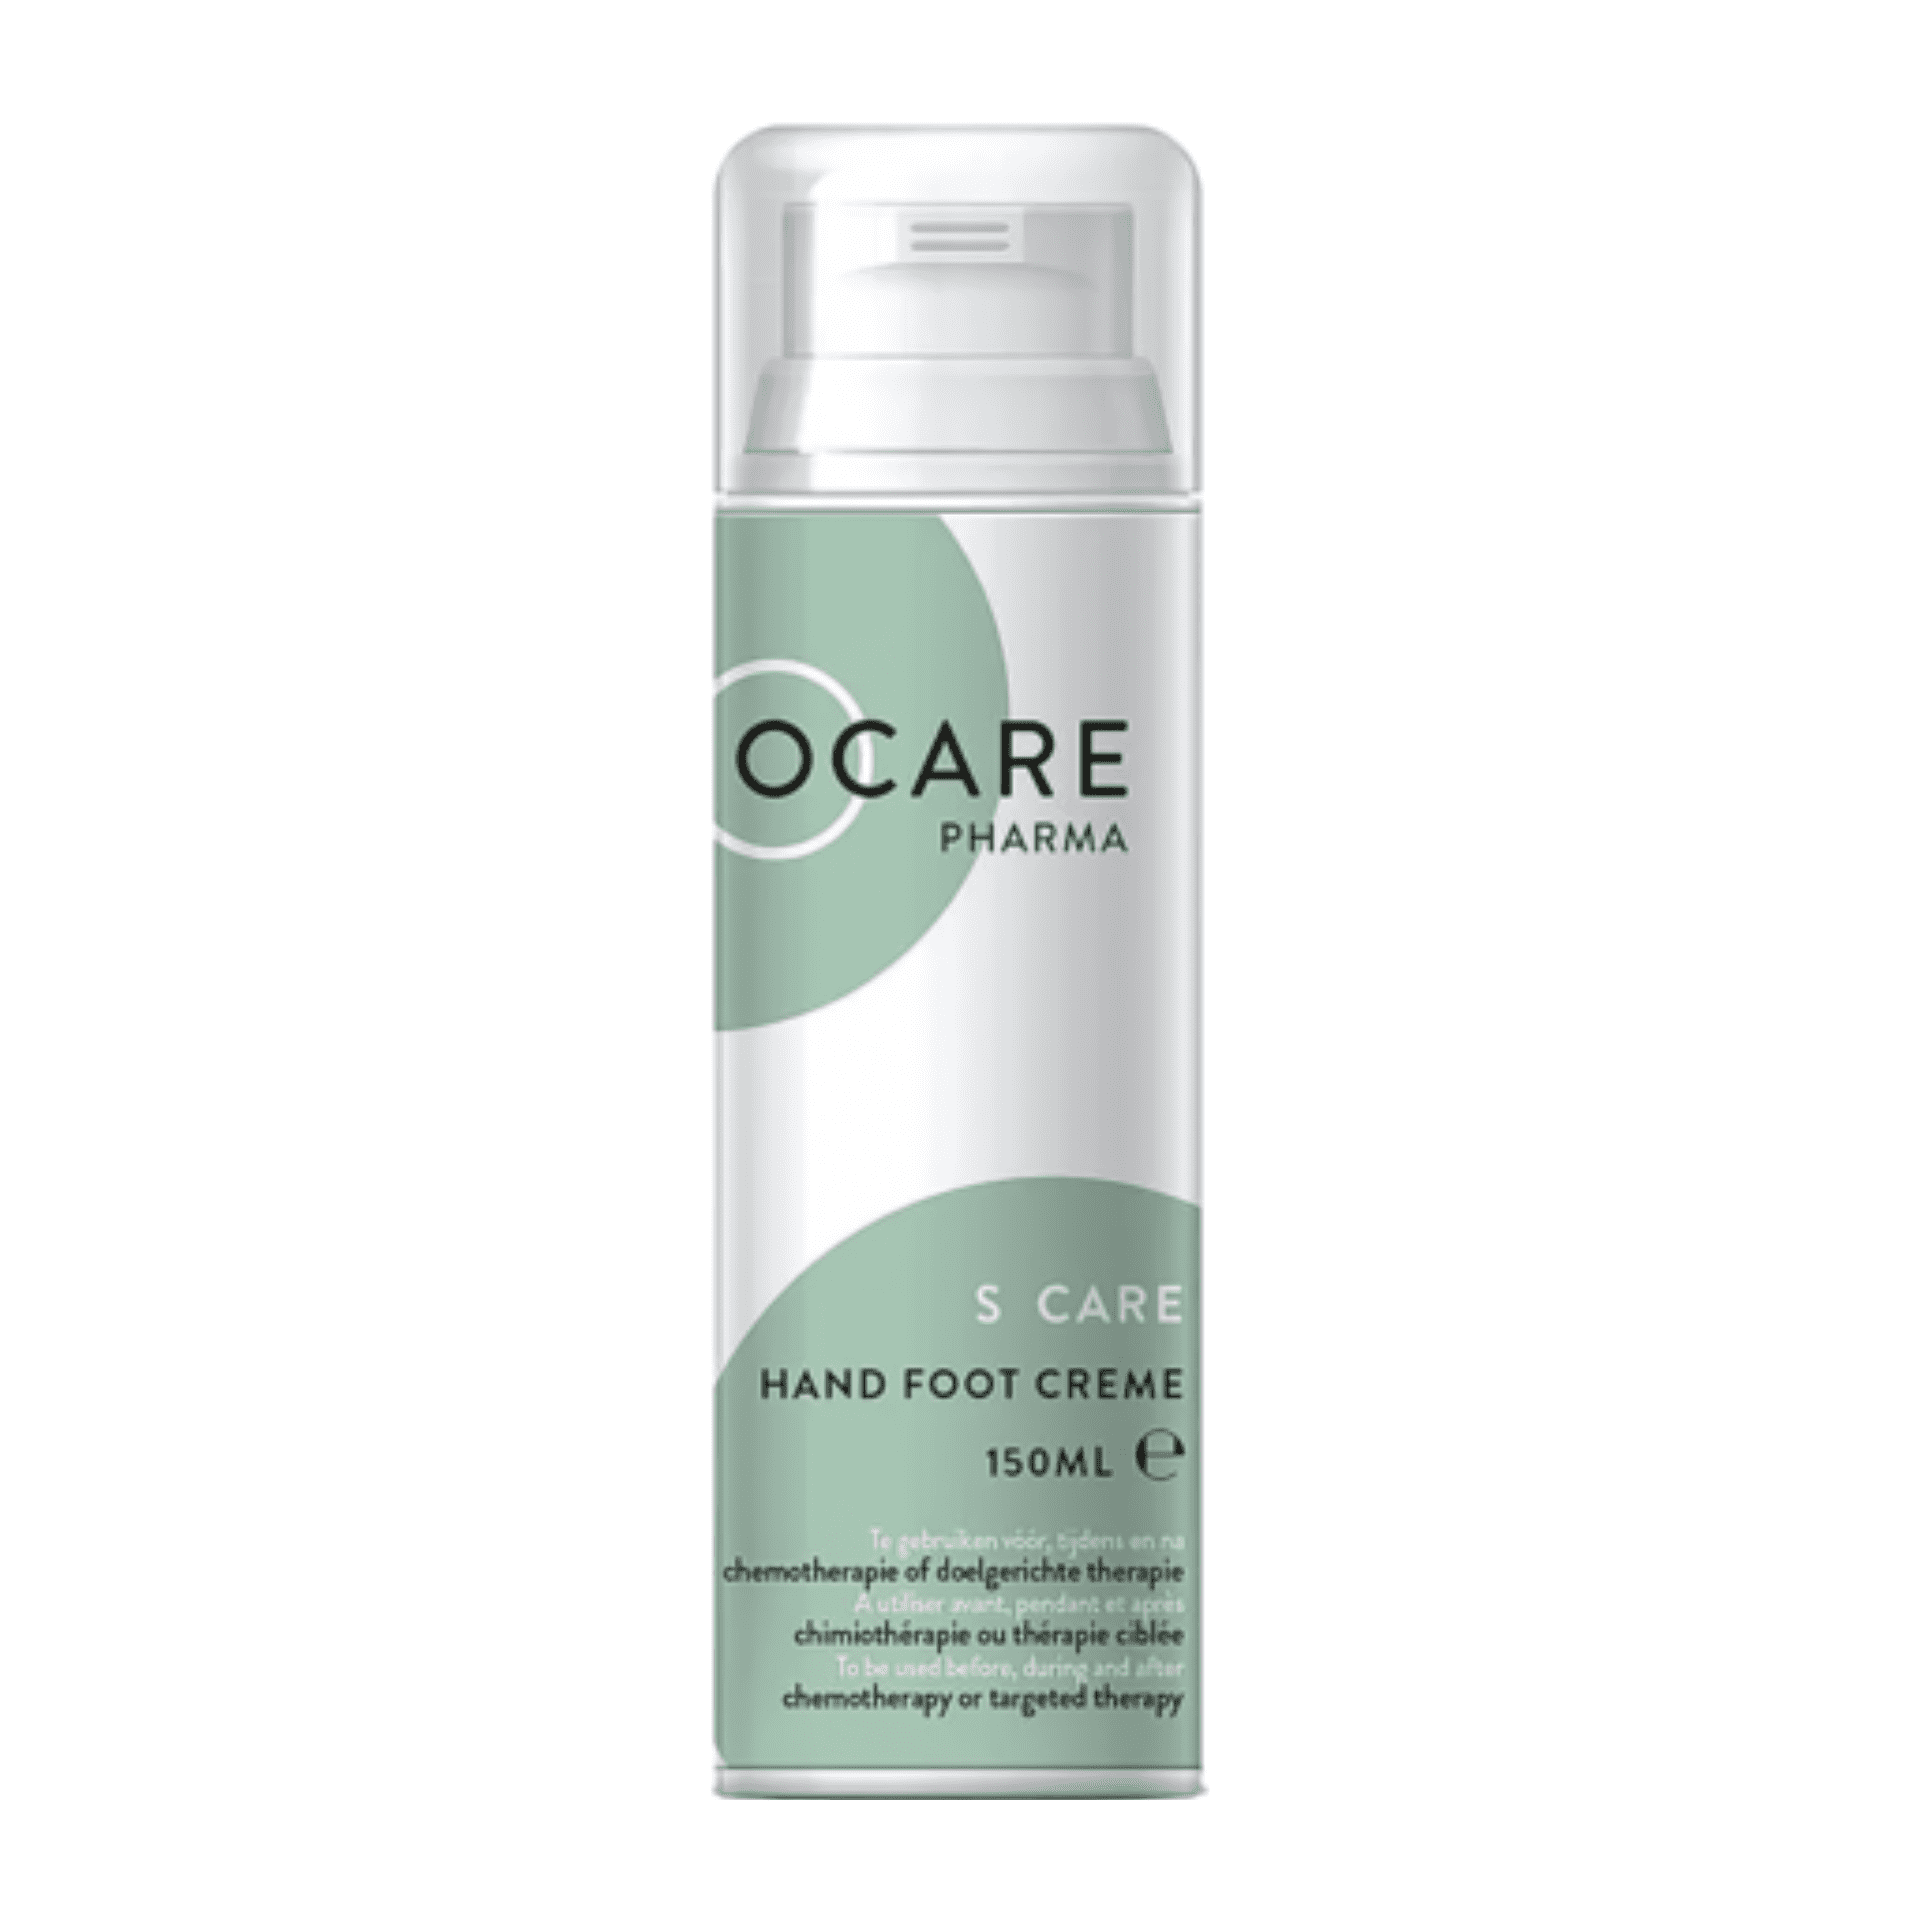 S Care Hand Foot Creme 150ml